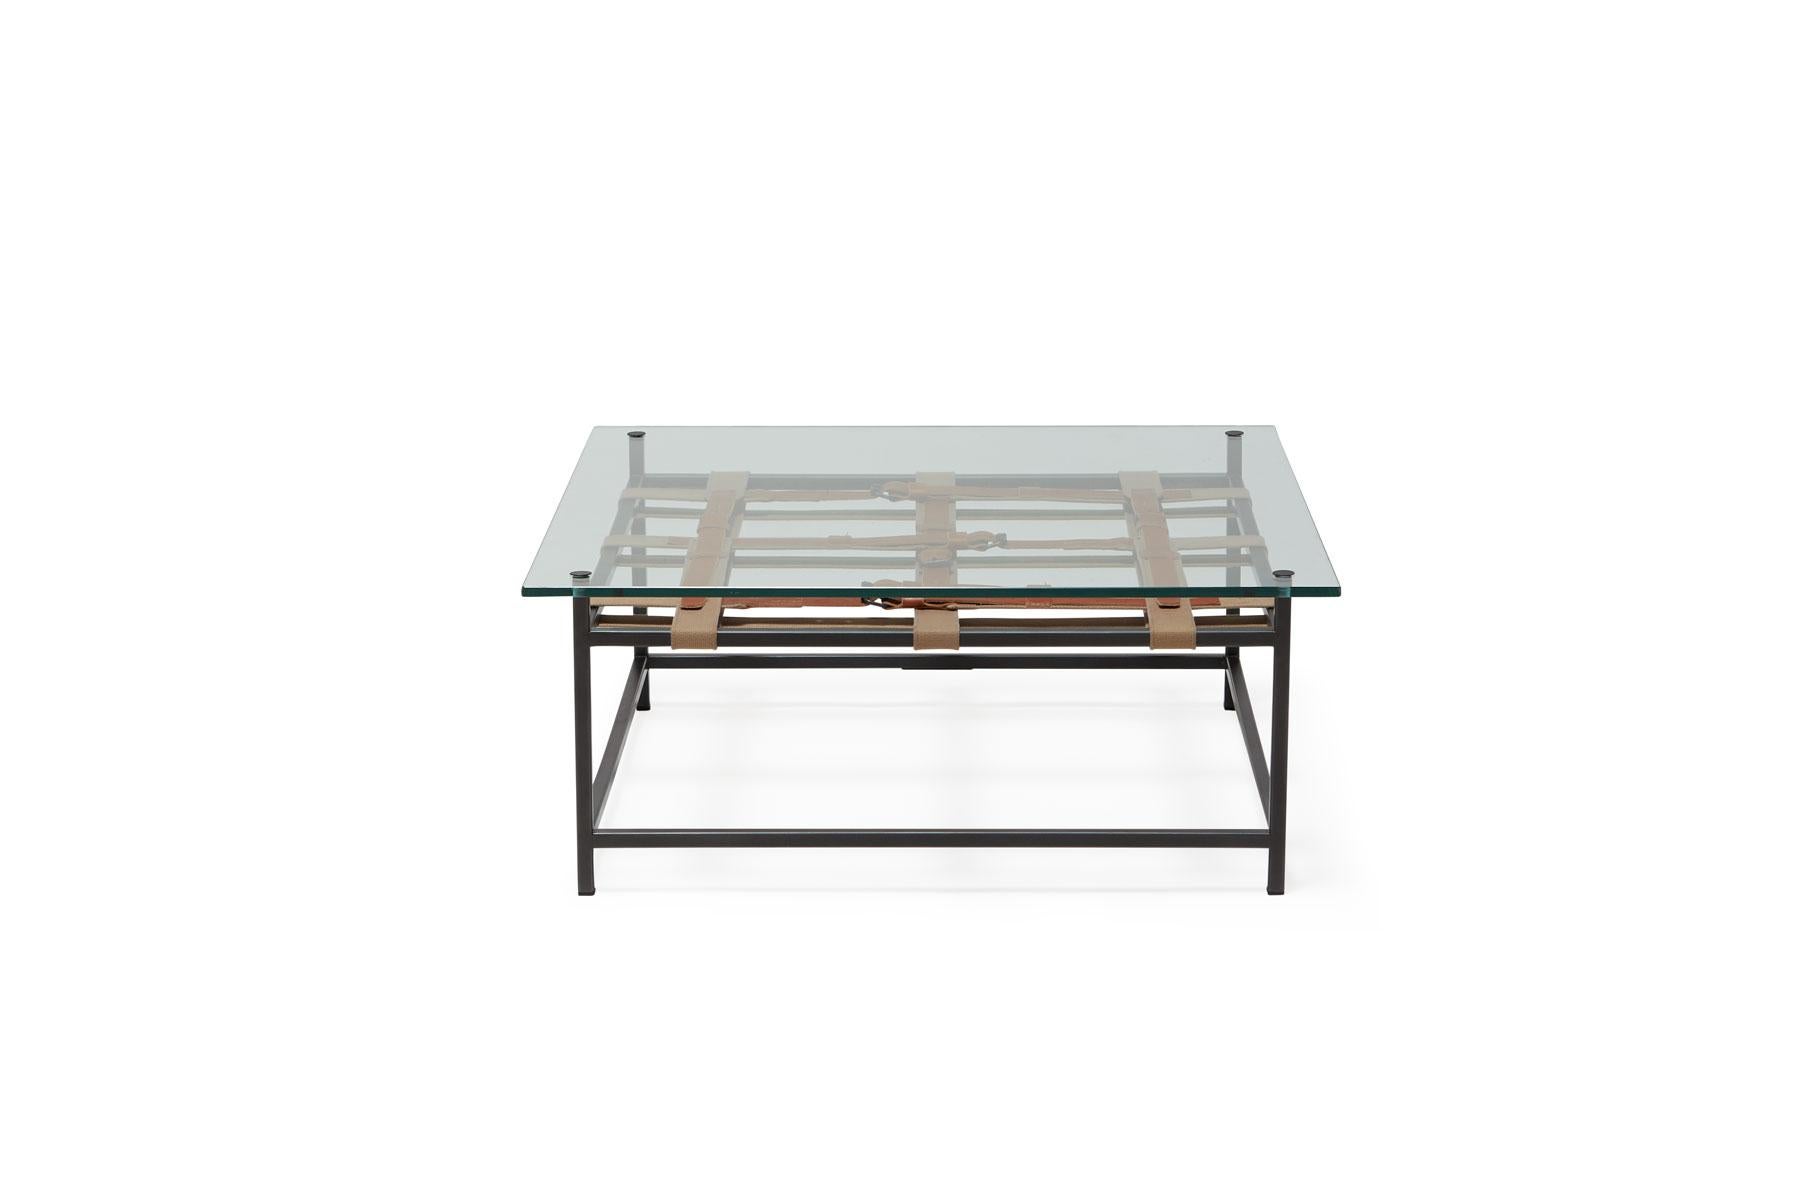 A glass topped coffee table that utilizes the signature Inheritance collection belts. The steel frame has a blackened steel finish and taupe cotton webbing belts with cognac leather and blackened steel buckles.

Every Stephen Kenn piece is made to